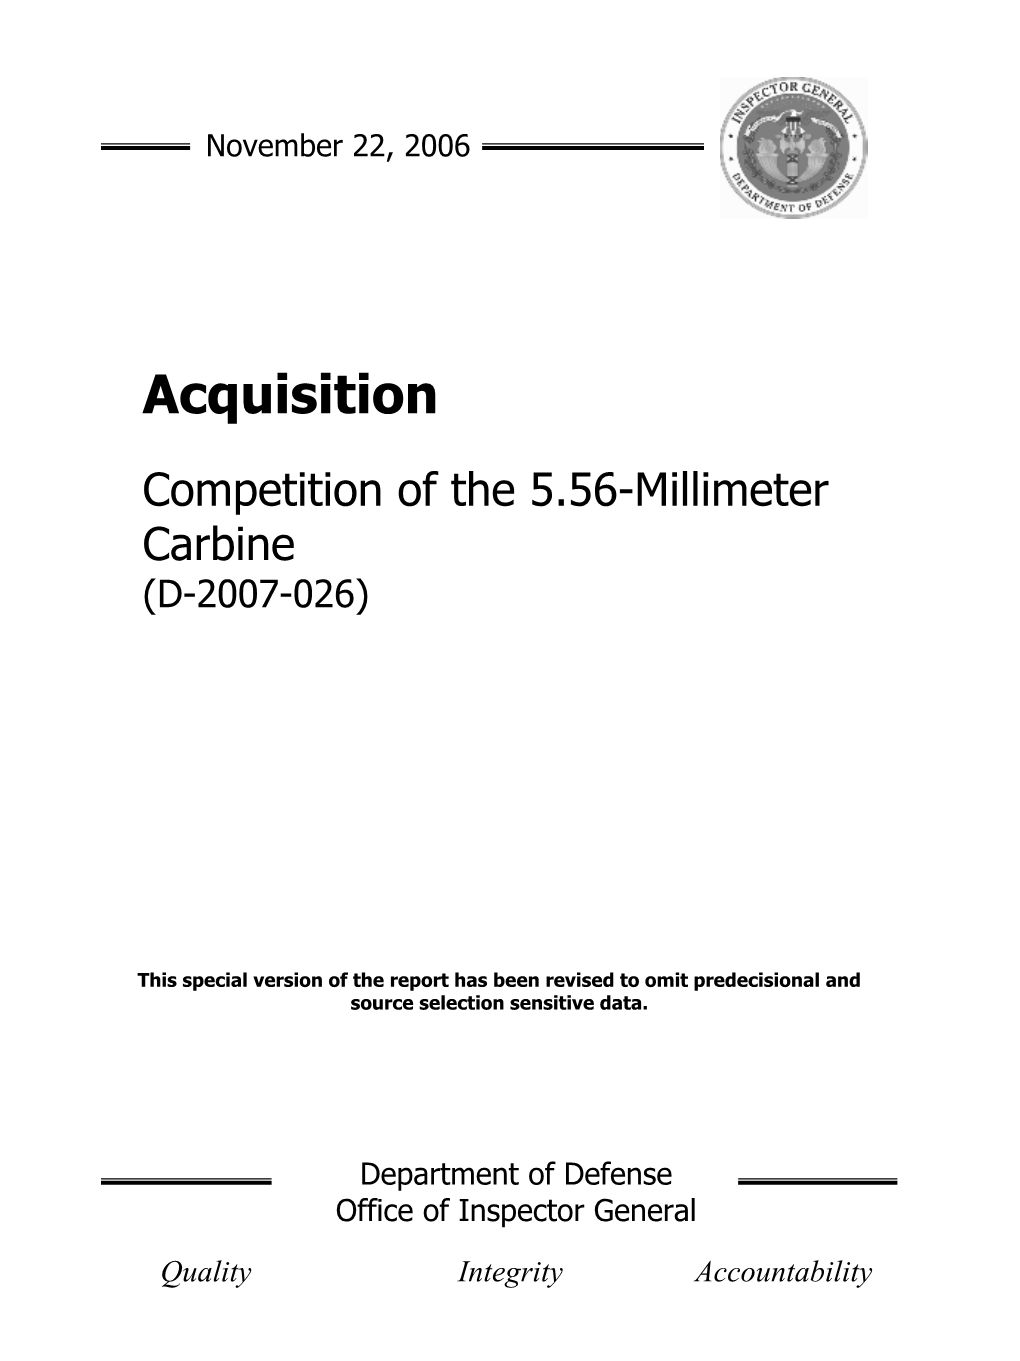 Acquisition Competition of the 5.56-Millimeter Carbine (D-2007-026)